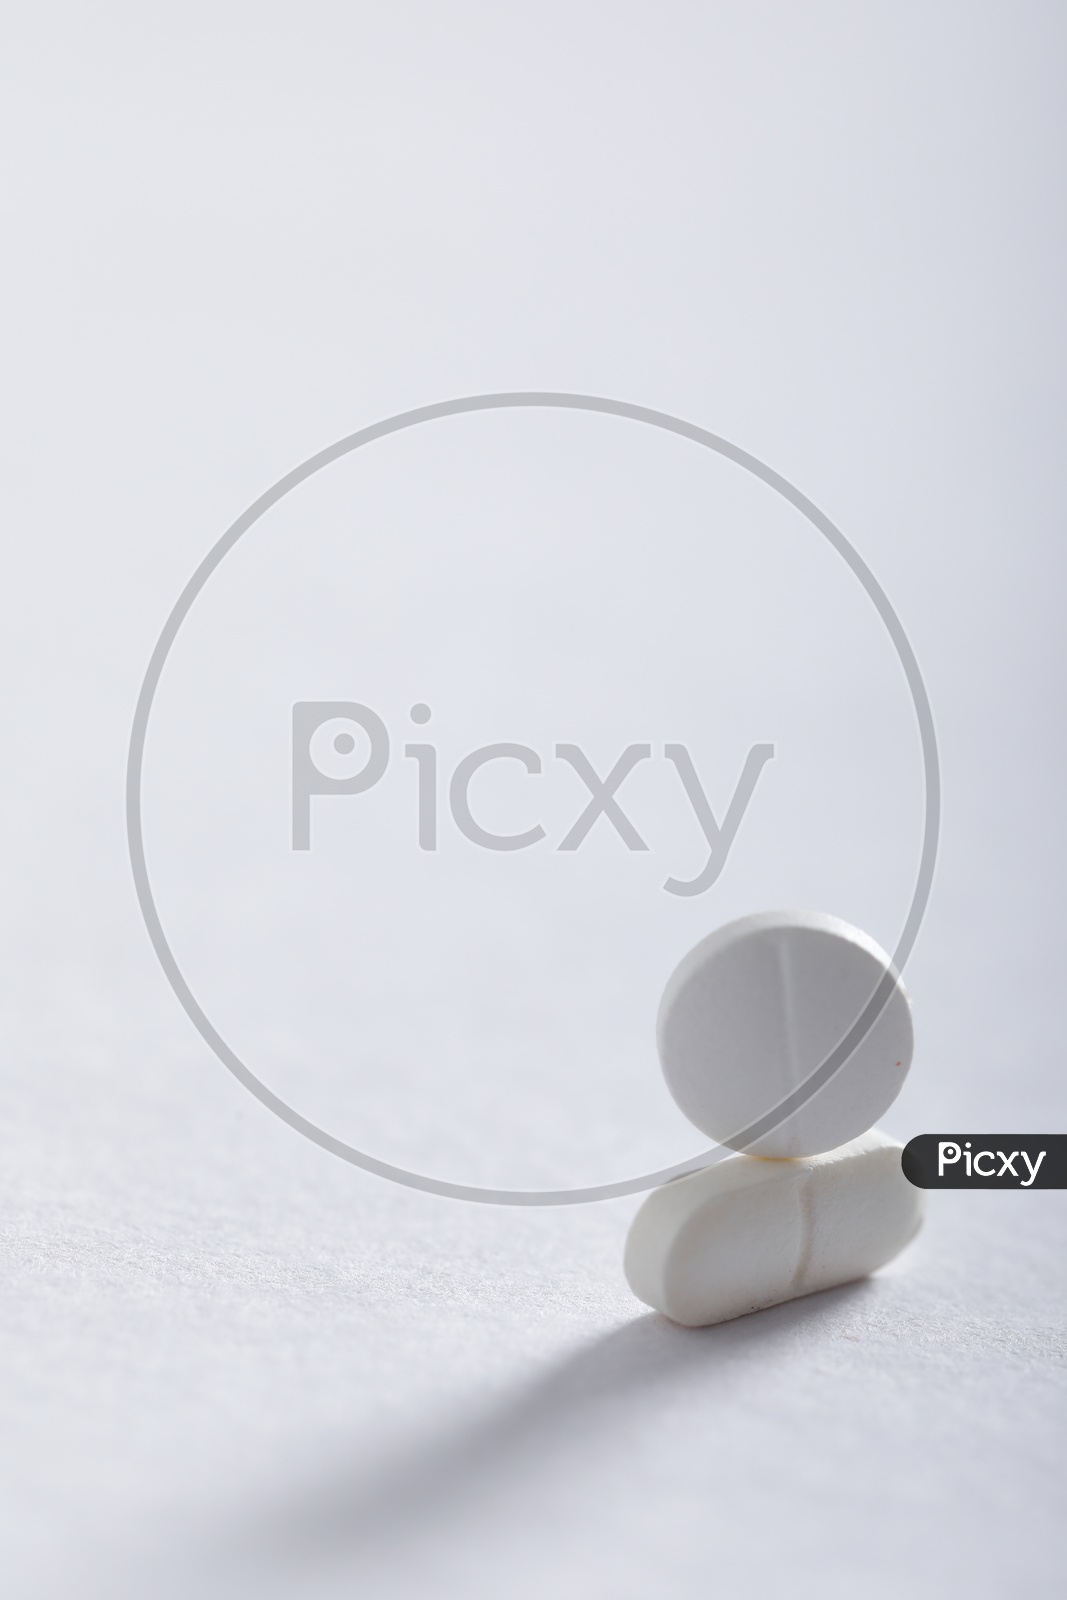 Medicinal Tablets  On an Isolated White Background  Pharmacy Pharmaceuticals   Concept